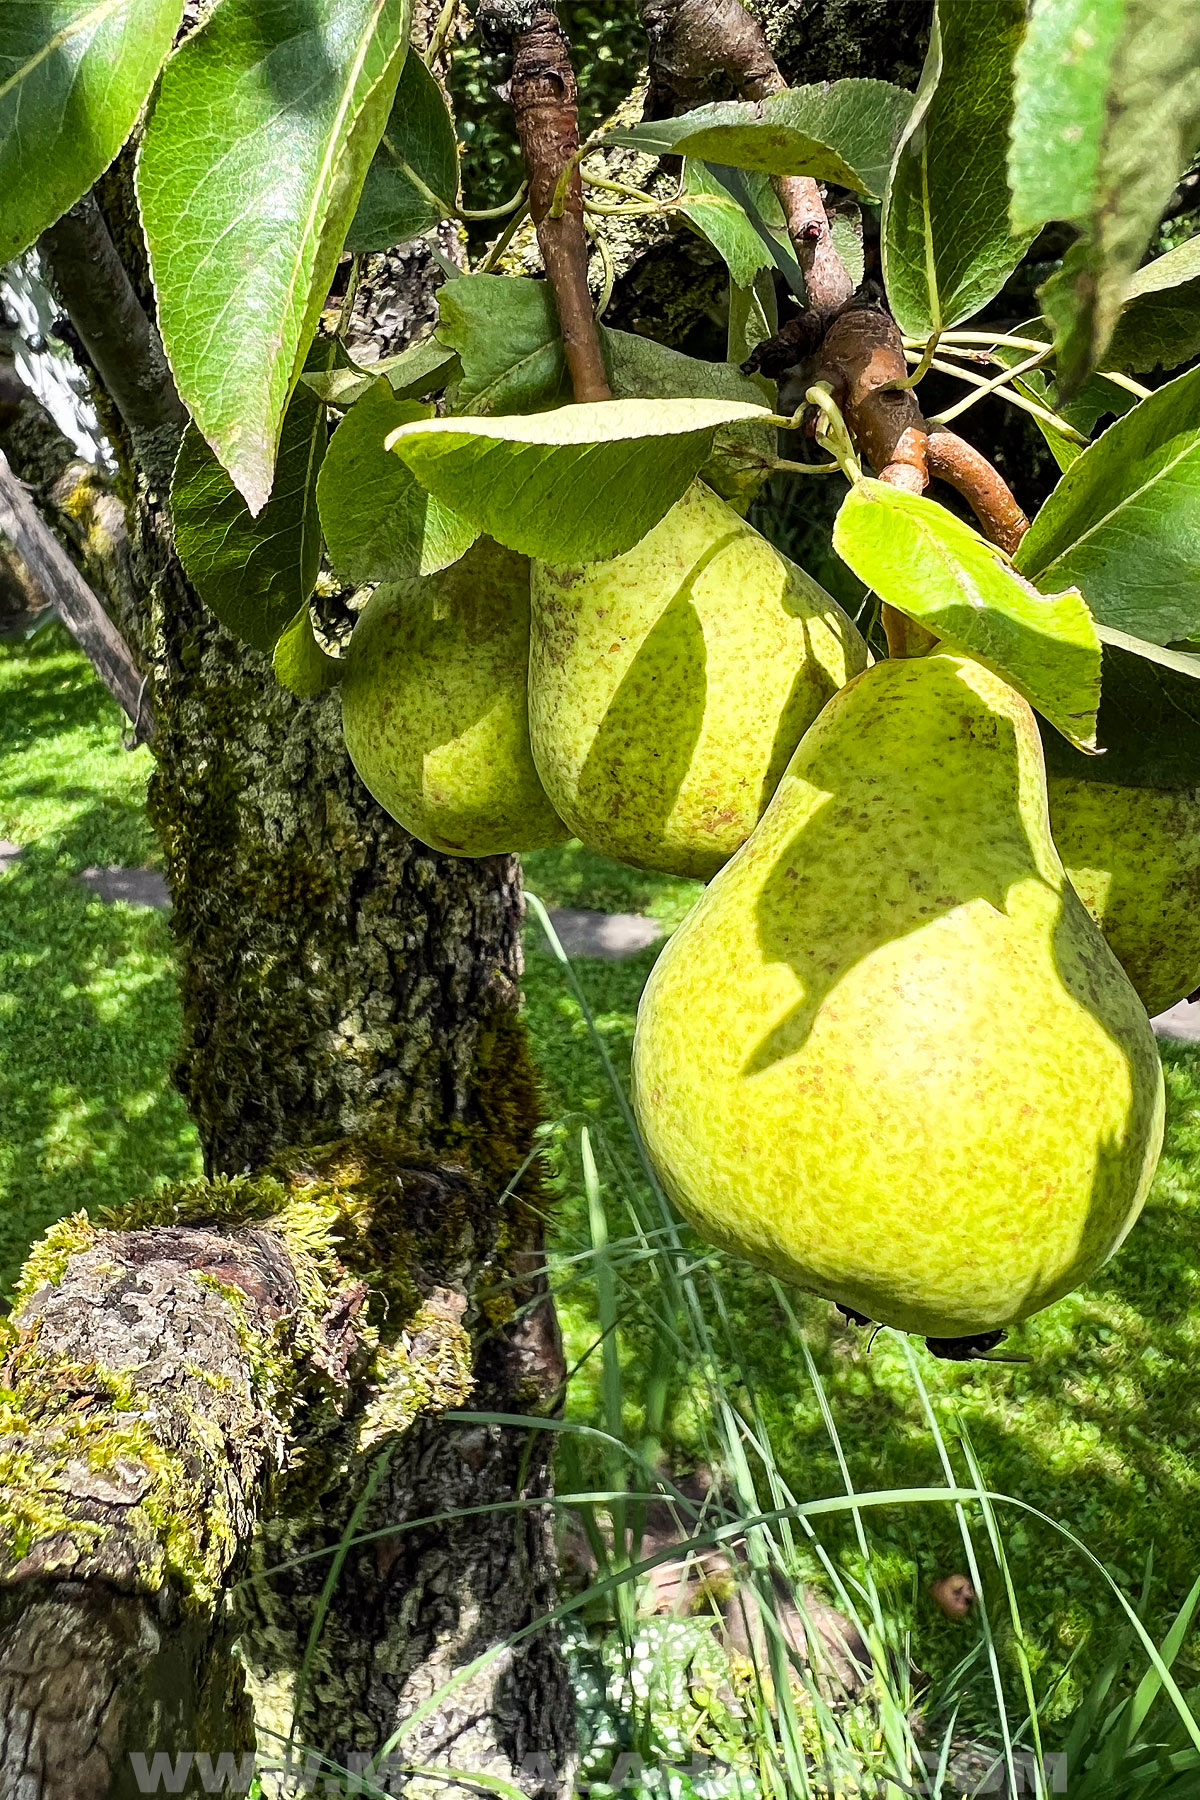 Pears growing on a tree in our garden